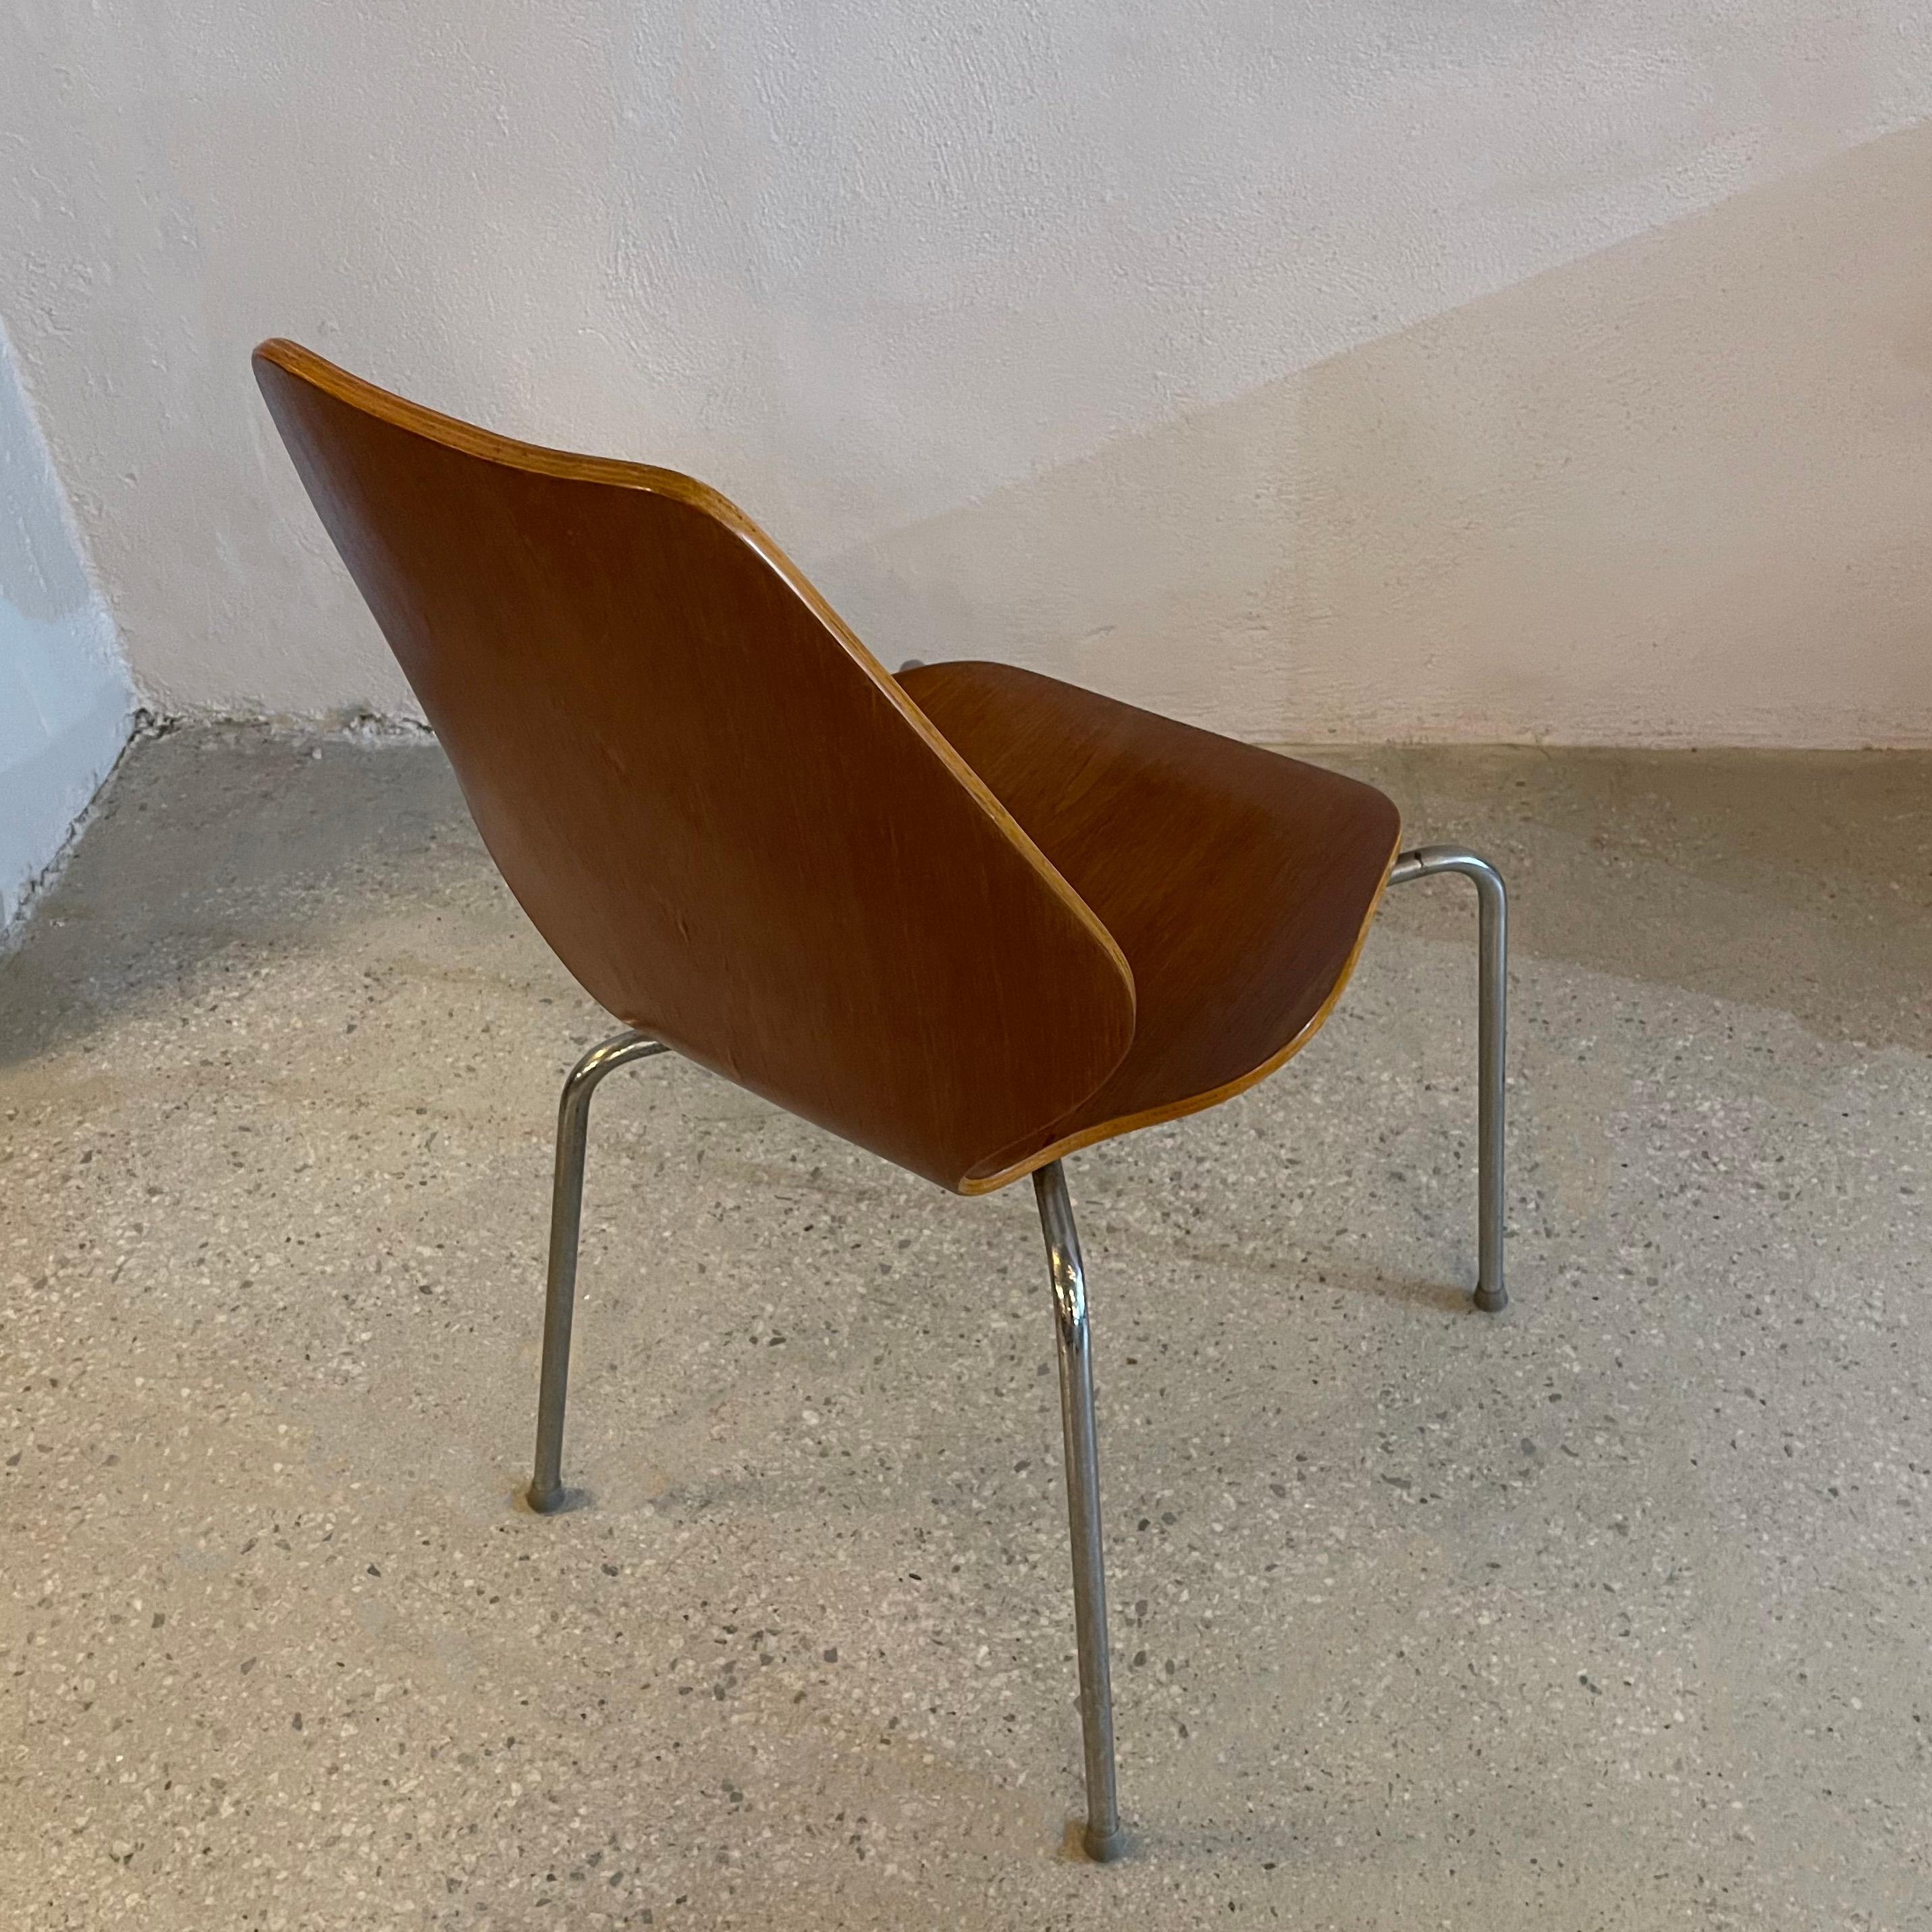 20th Century Scandinavian Modern Bentwood And Chrome Side Chair For Sale